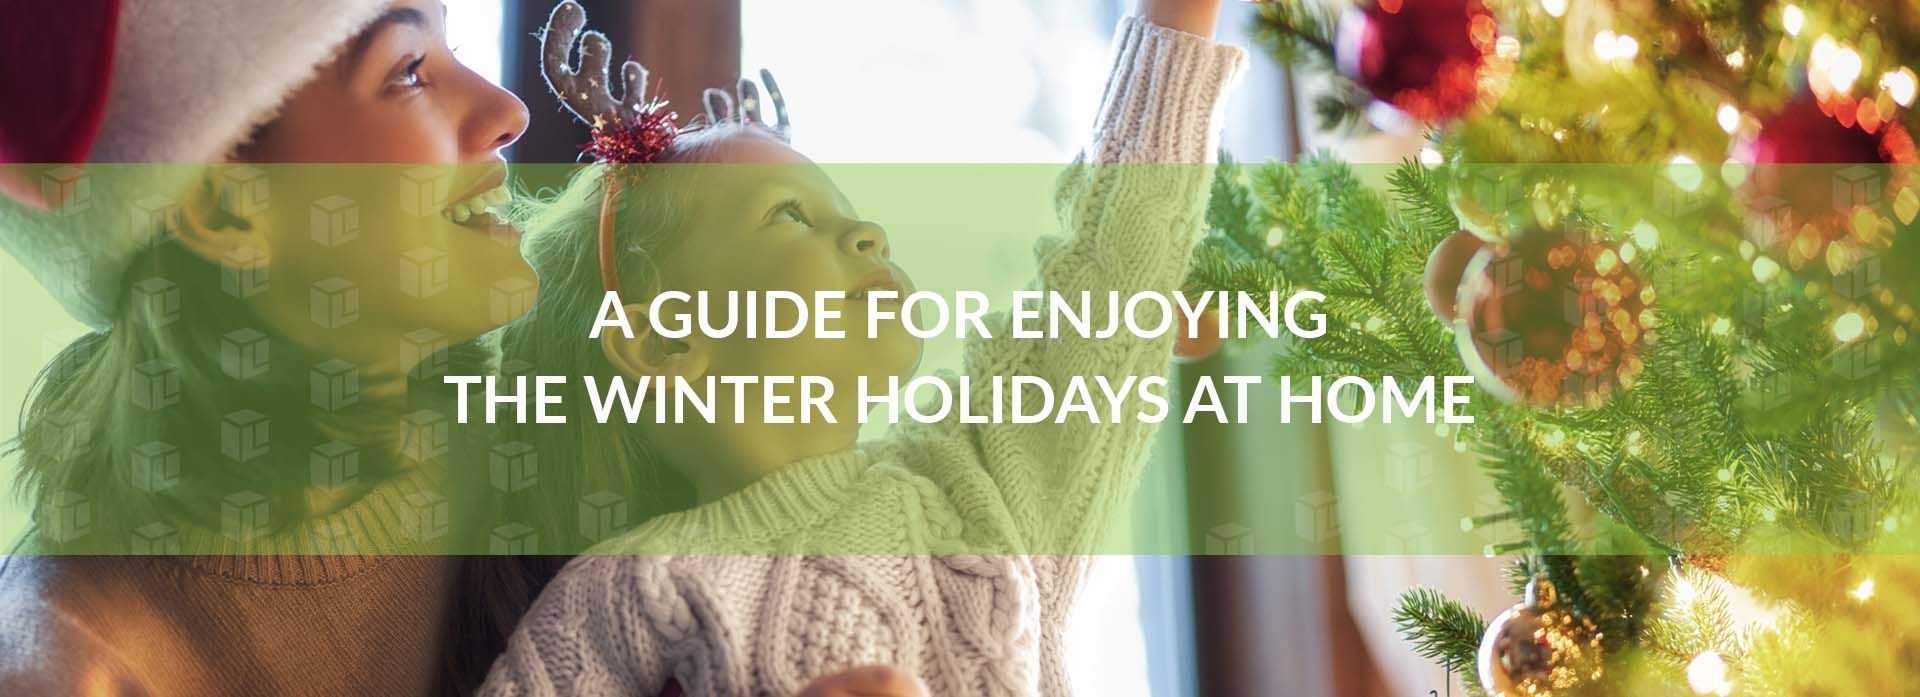 A Guide For Enjoying The Winter Holidays At Home